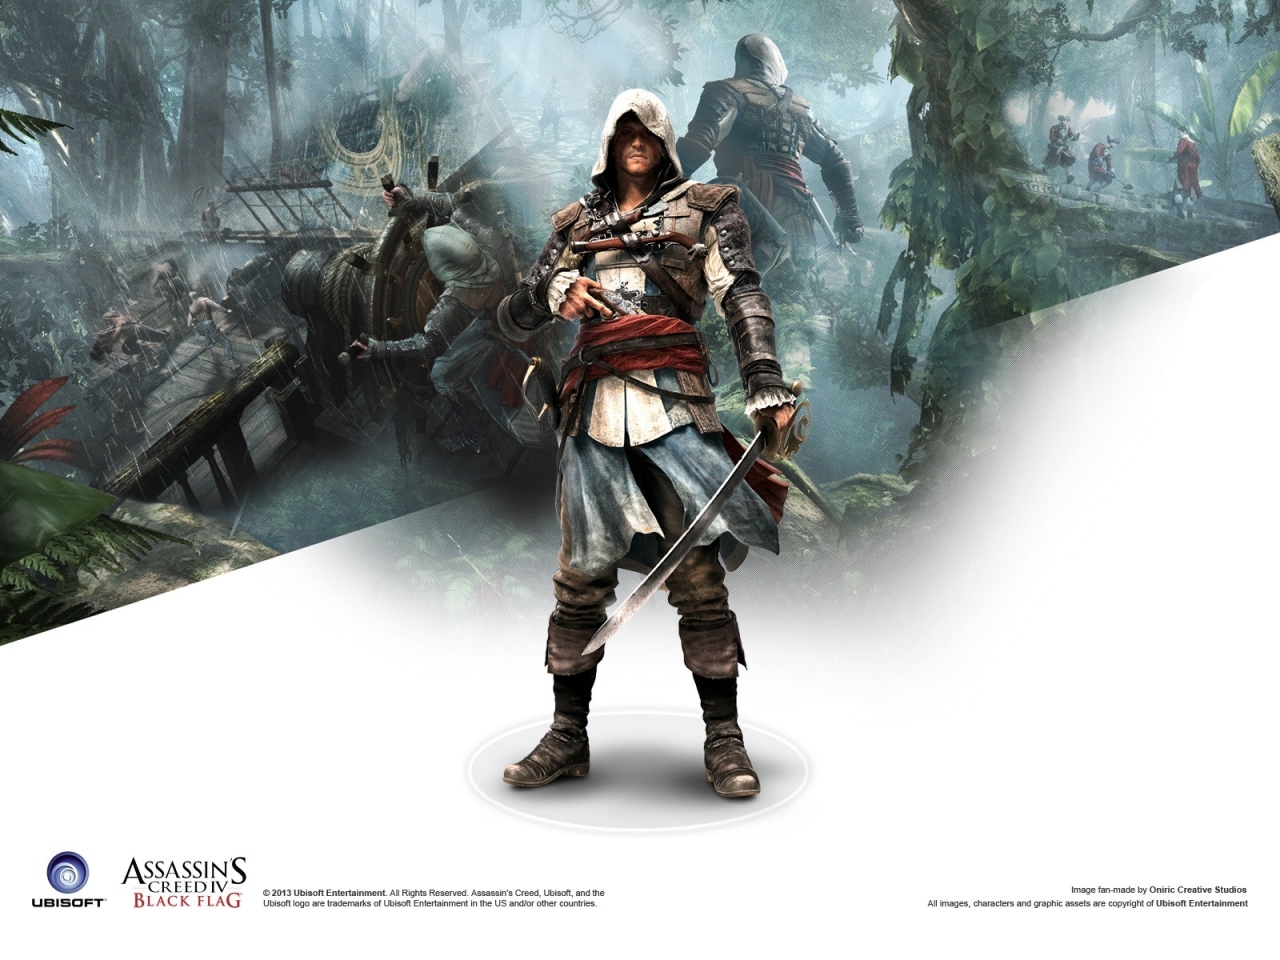 Assassins Creed 4 for 1280 x 960 resolution